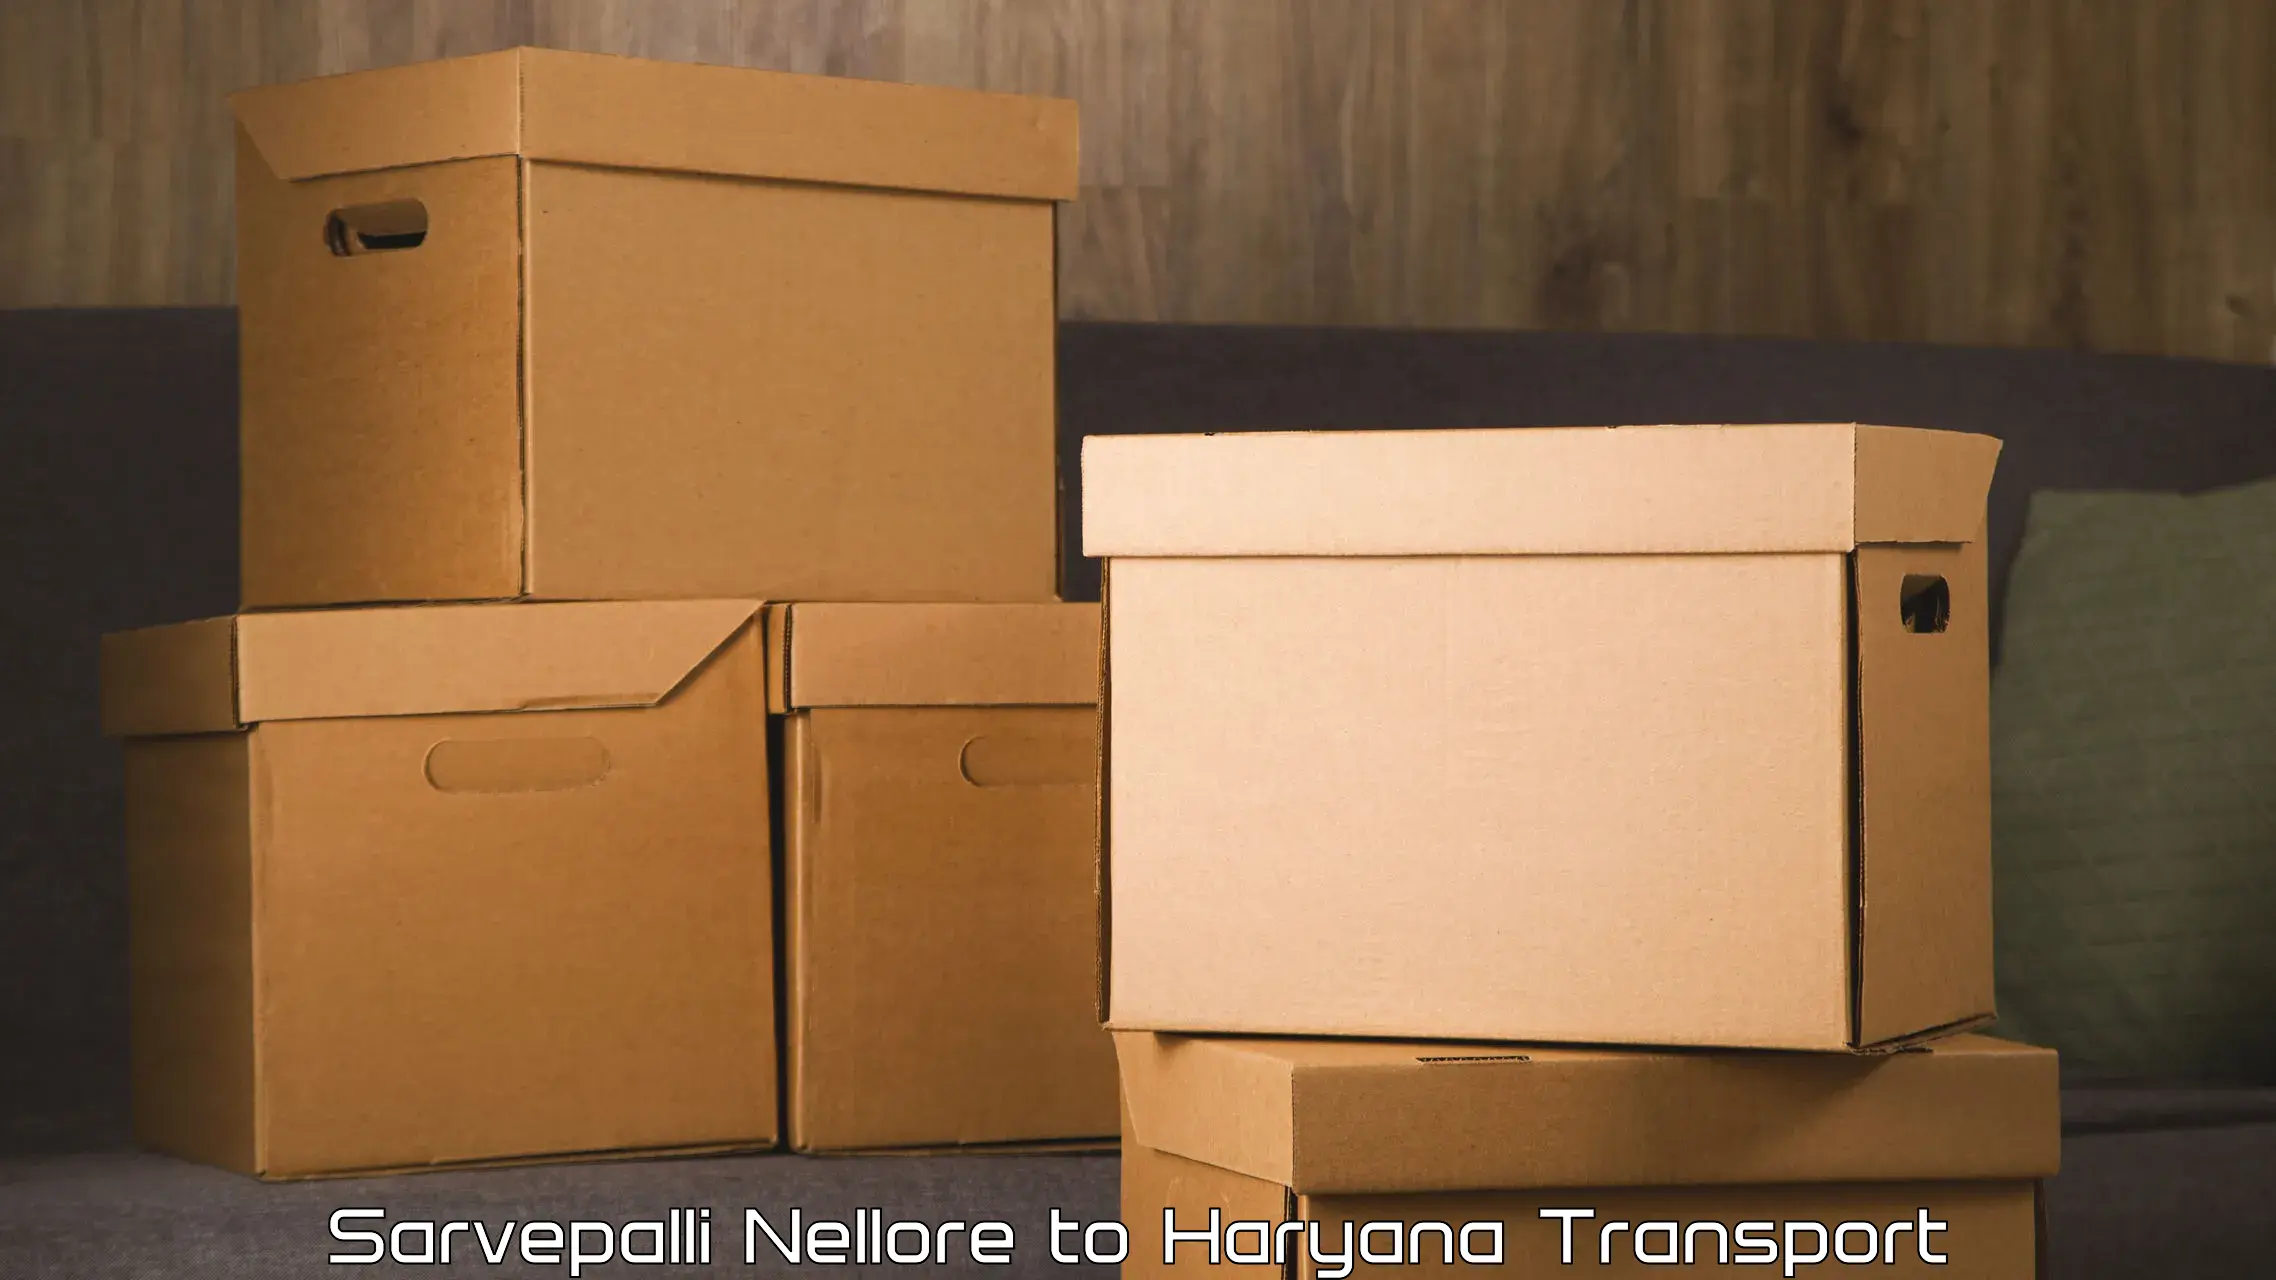 Luggage transport services in Sarvepalli Nellore to NCR Haryana